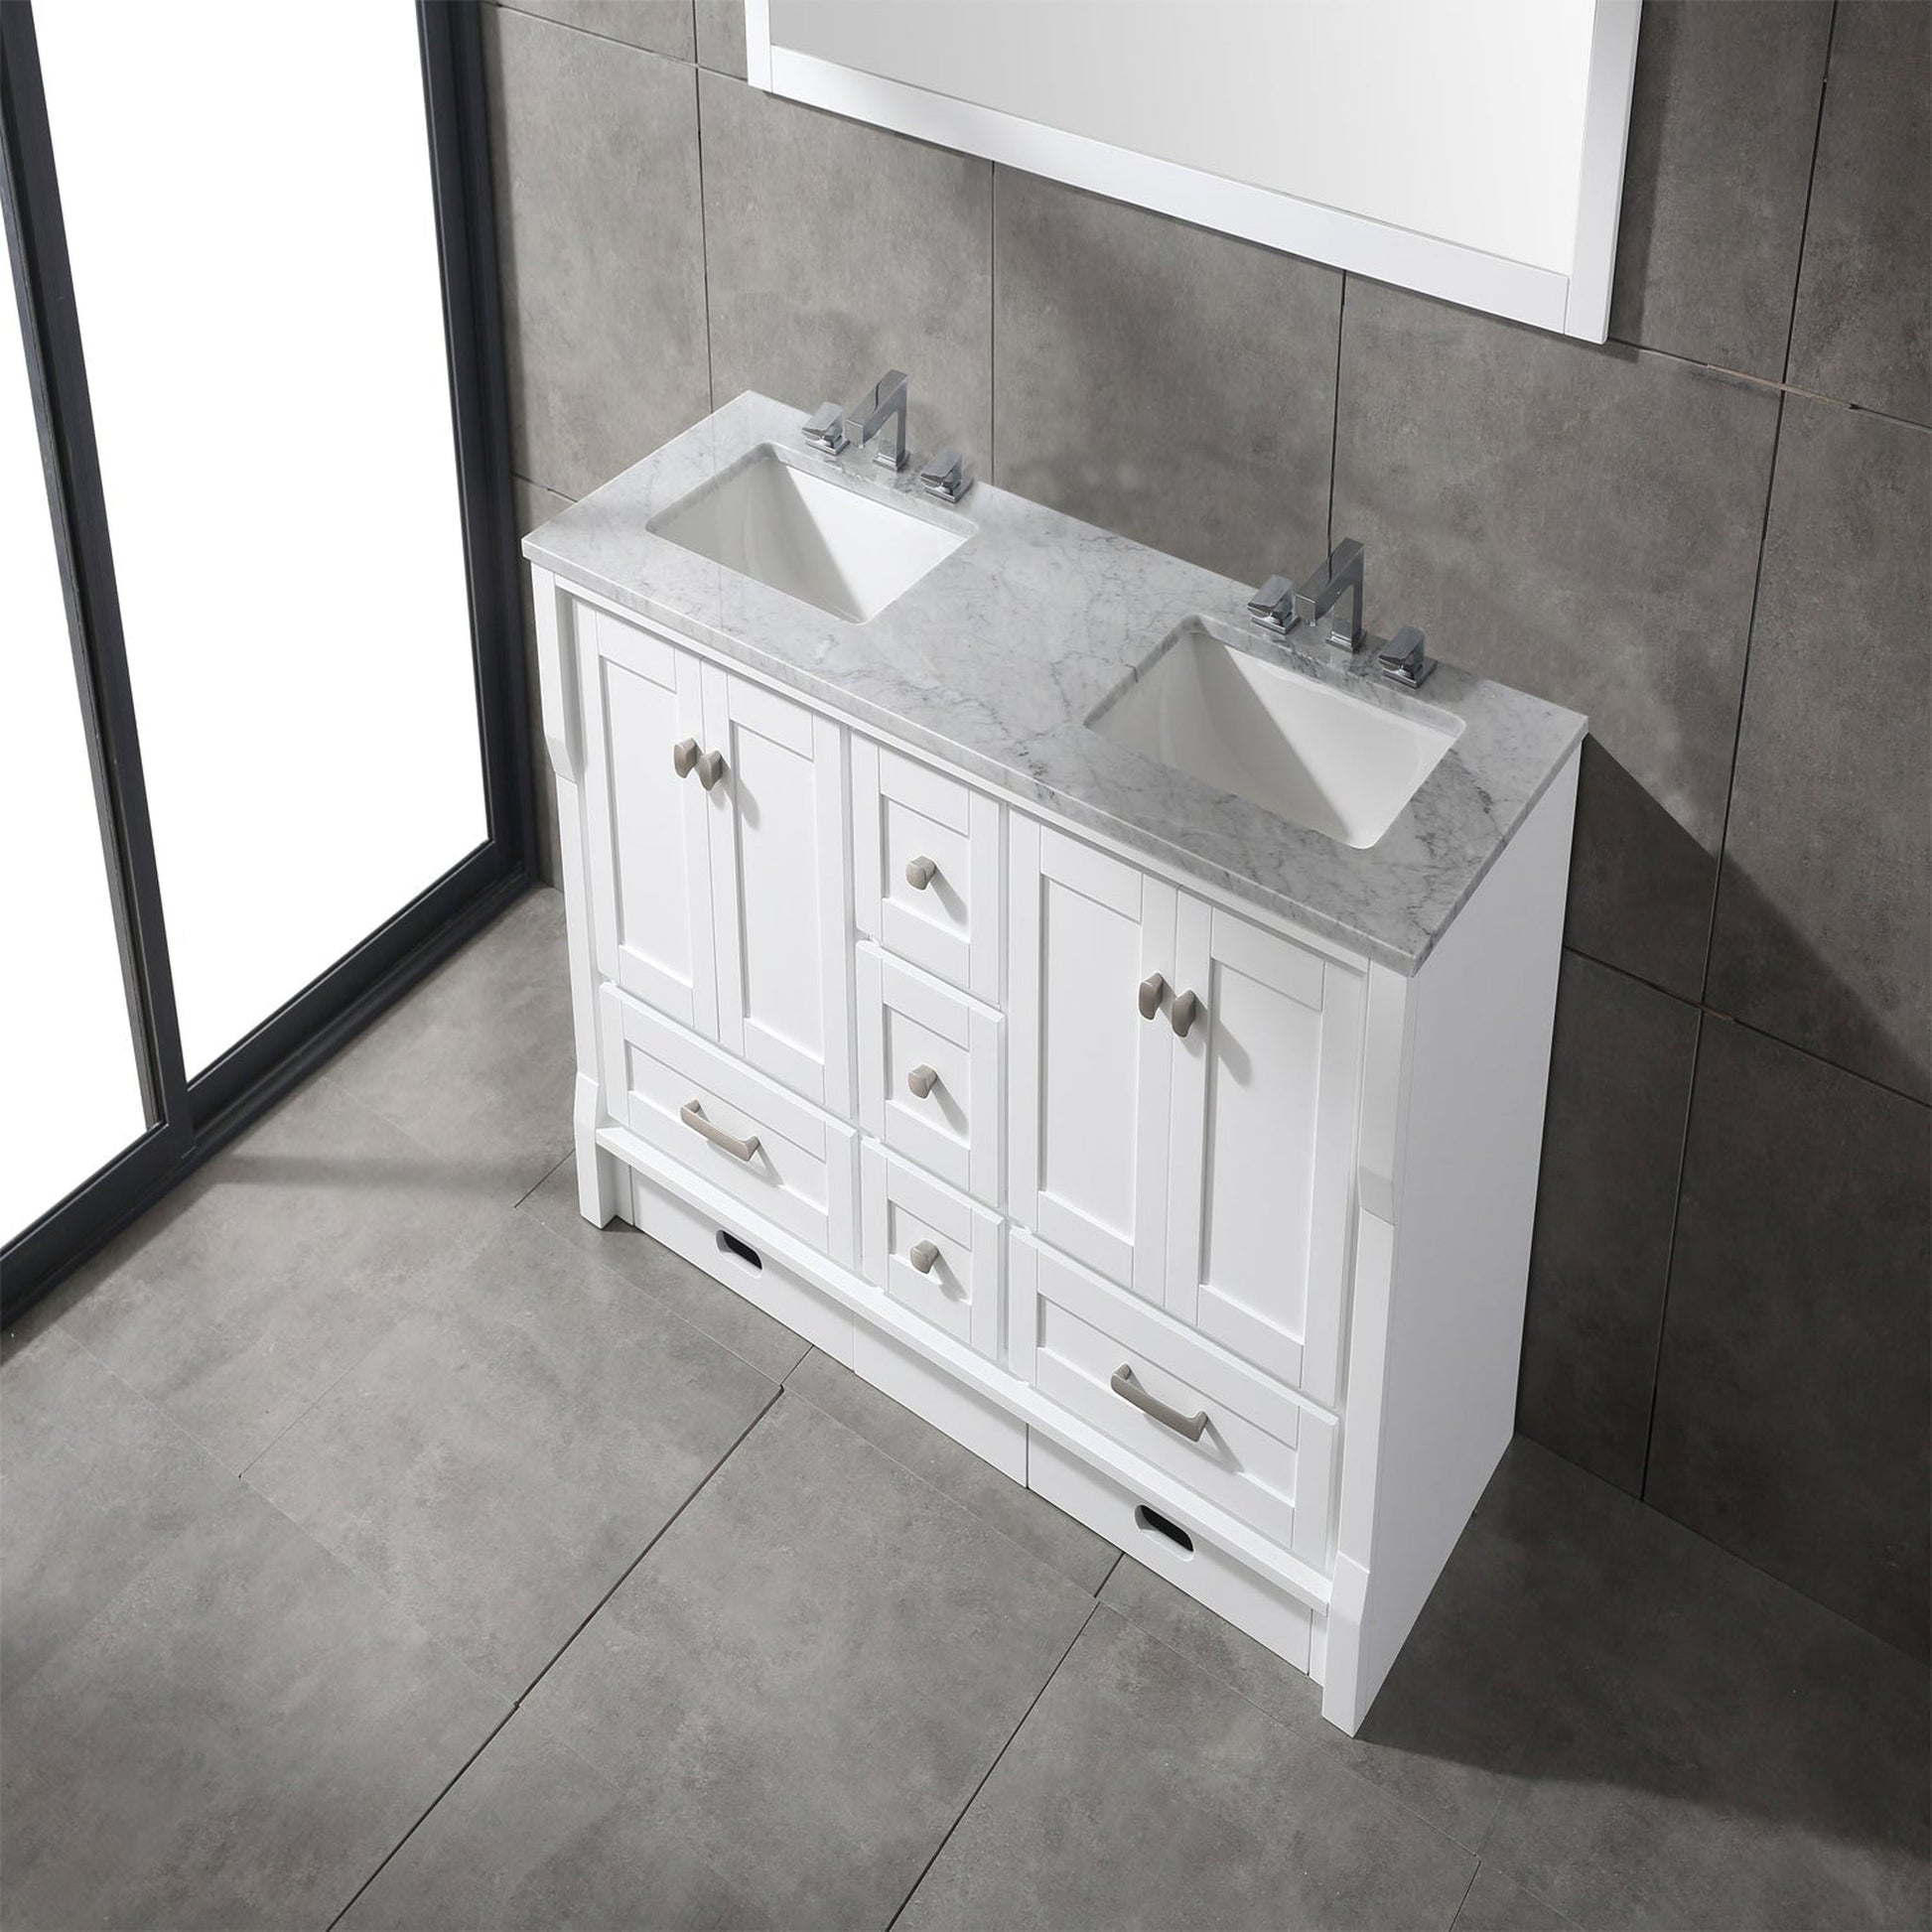 Eviva Booster 60” x 34” White Freestanding Bathroom Vanity With White Carrara Marble Countertop and Double Undermount Sink